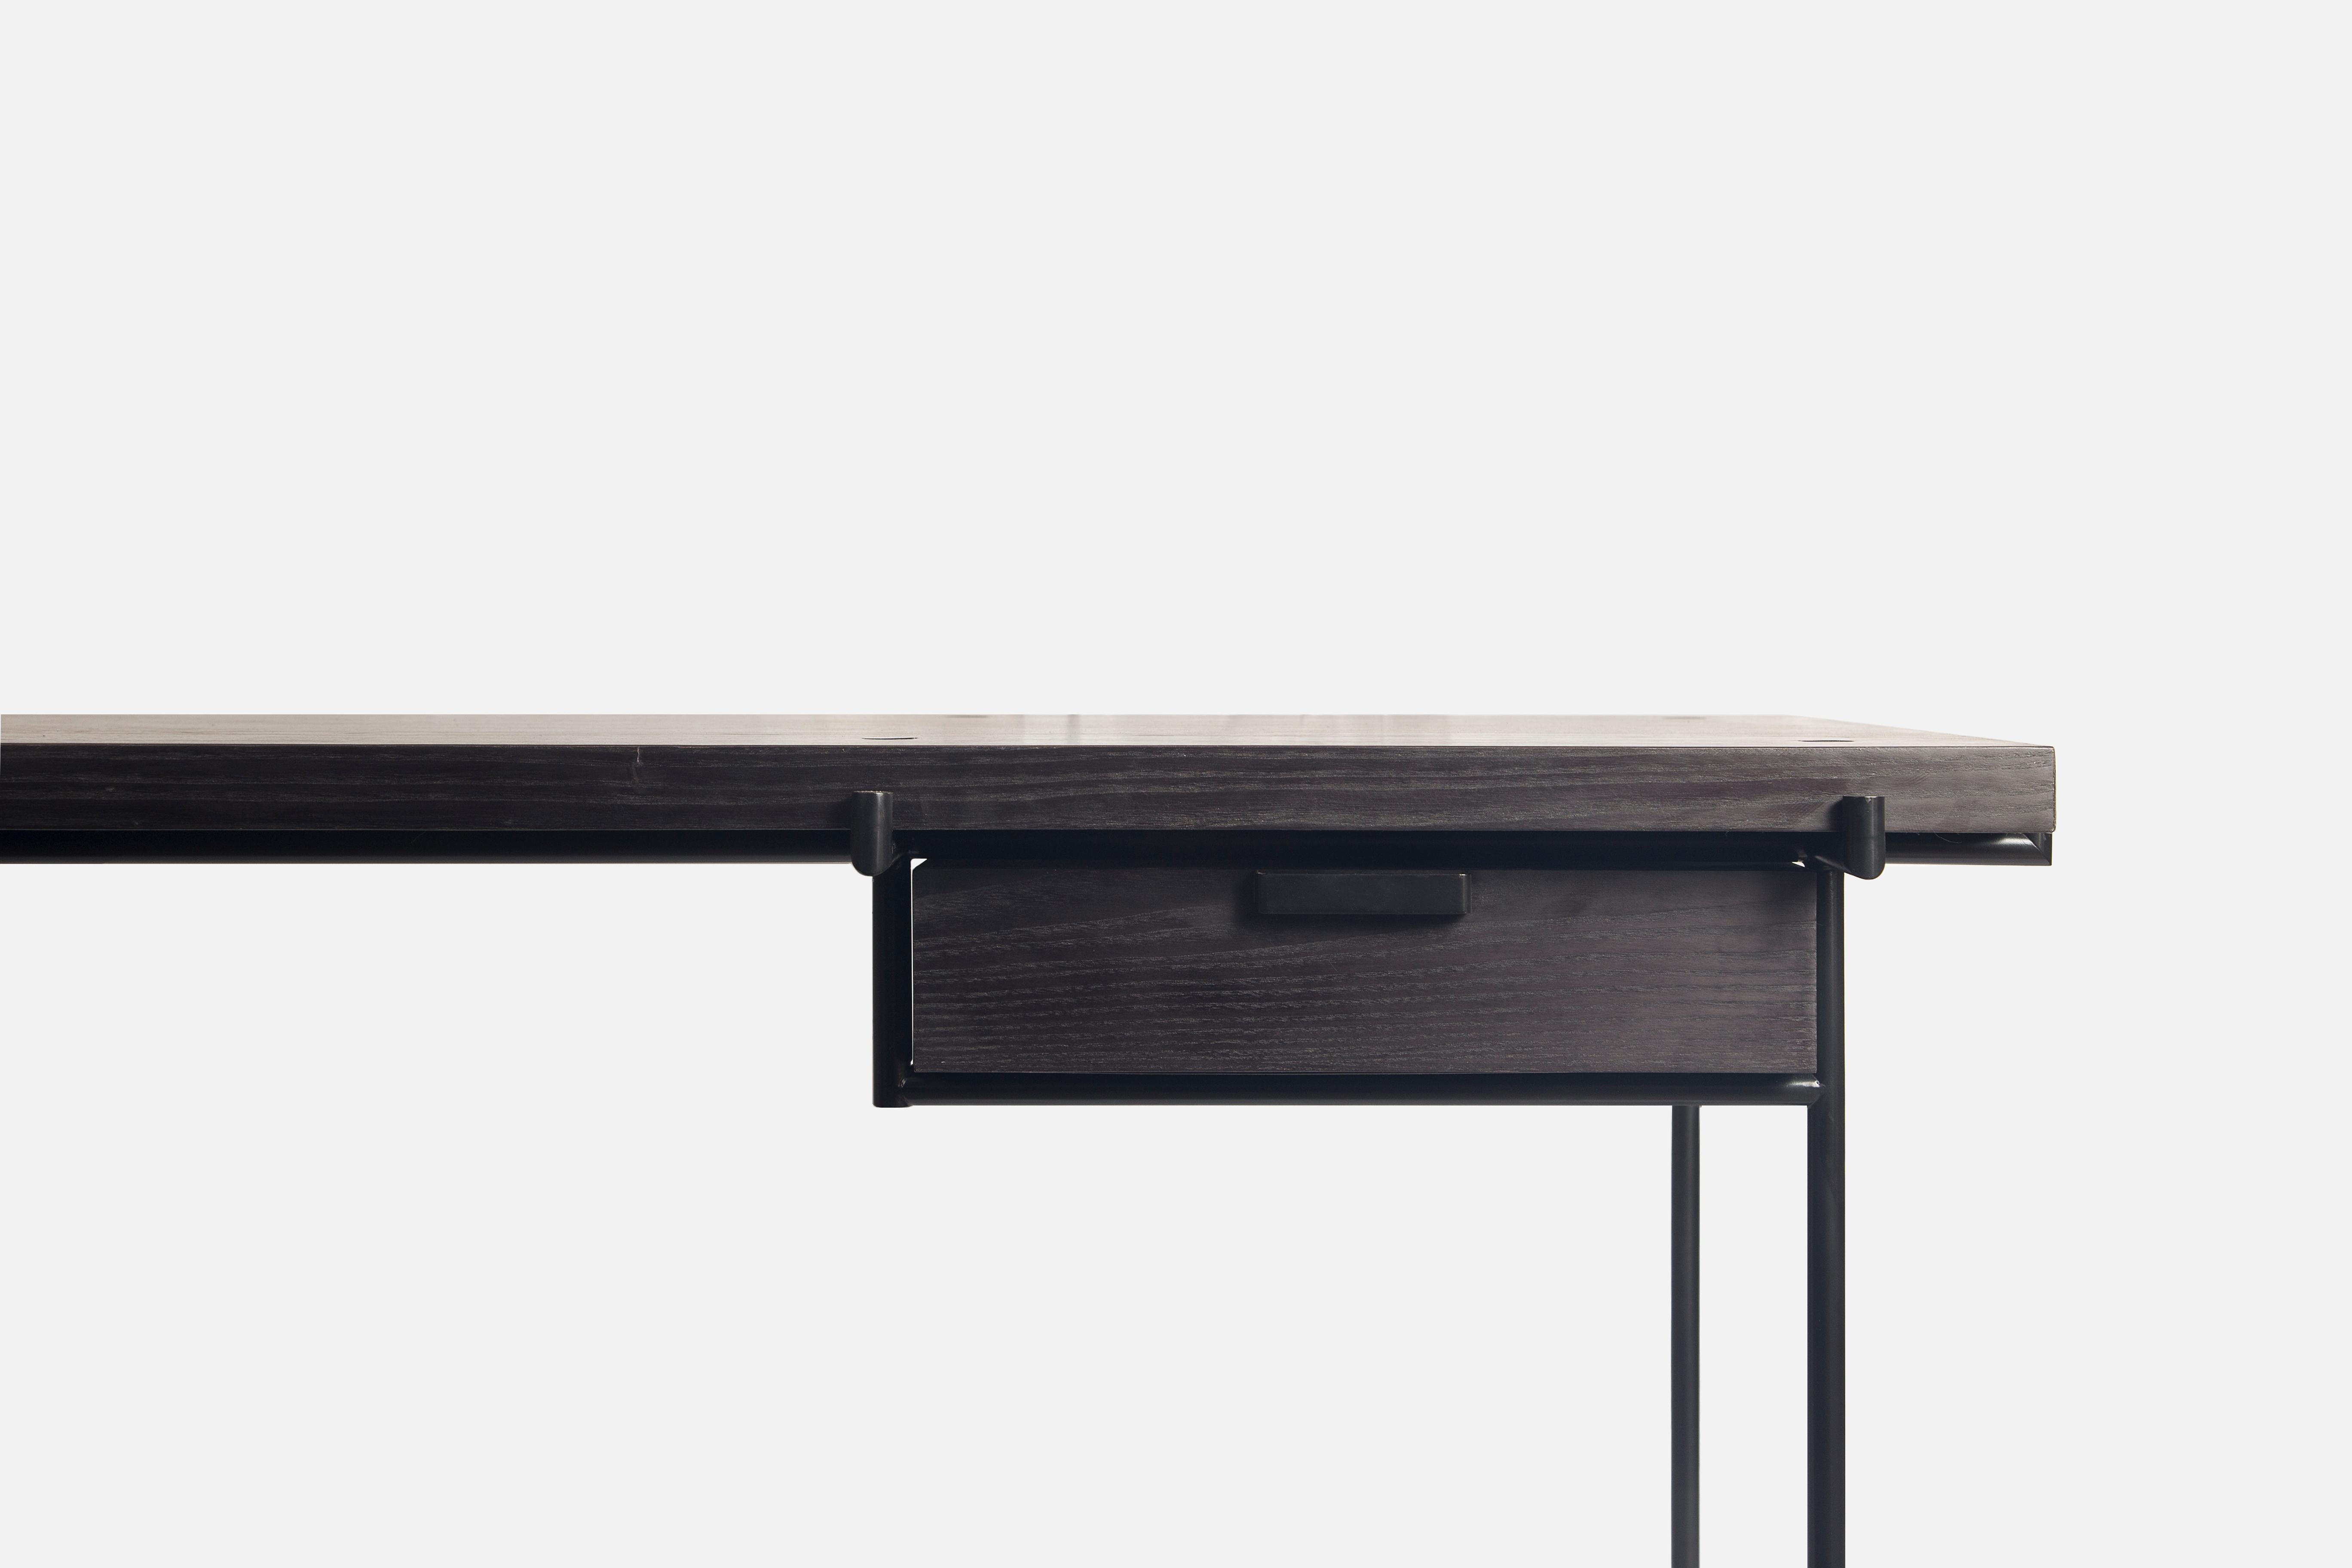 Marajoara desk with drawers is a study on Mid-Century Modern utilitarian furniture, minimalist in its details, with Brazilian Native Arte Reference. By Atelier BAM Design.

The modern design style is one of the most influential movements in